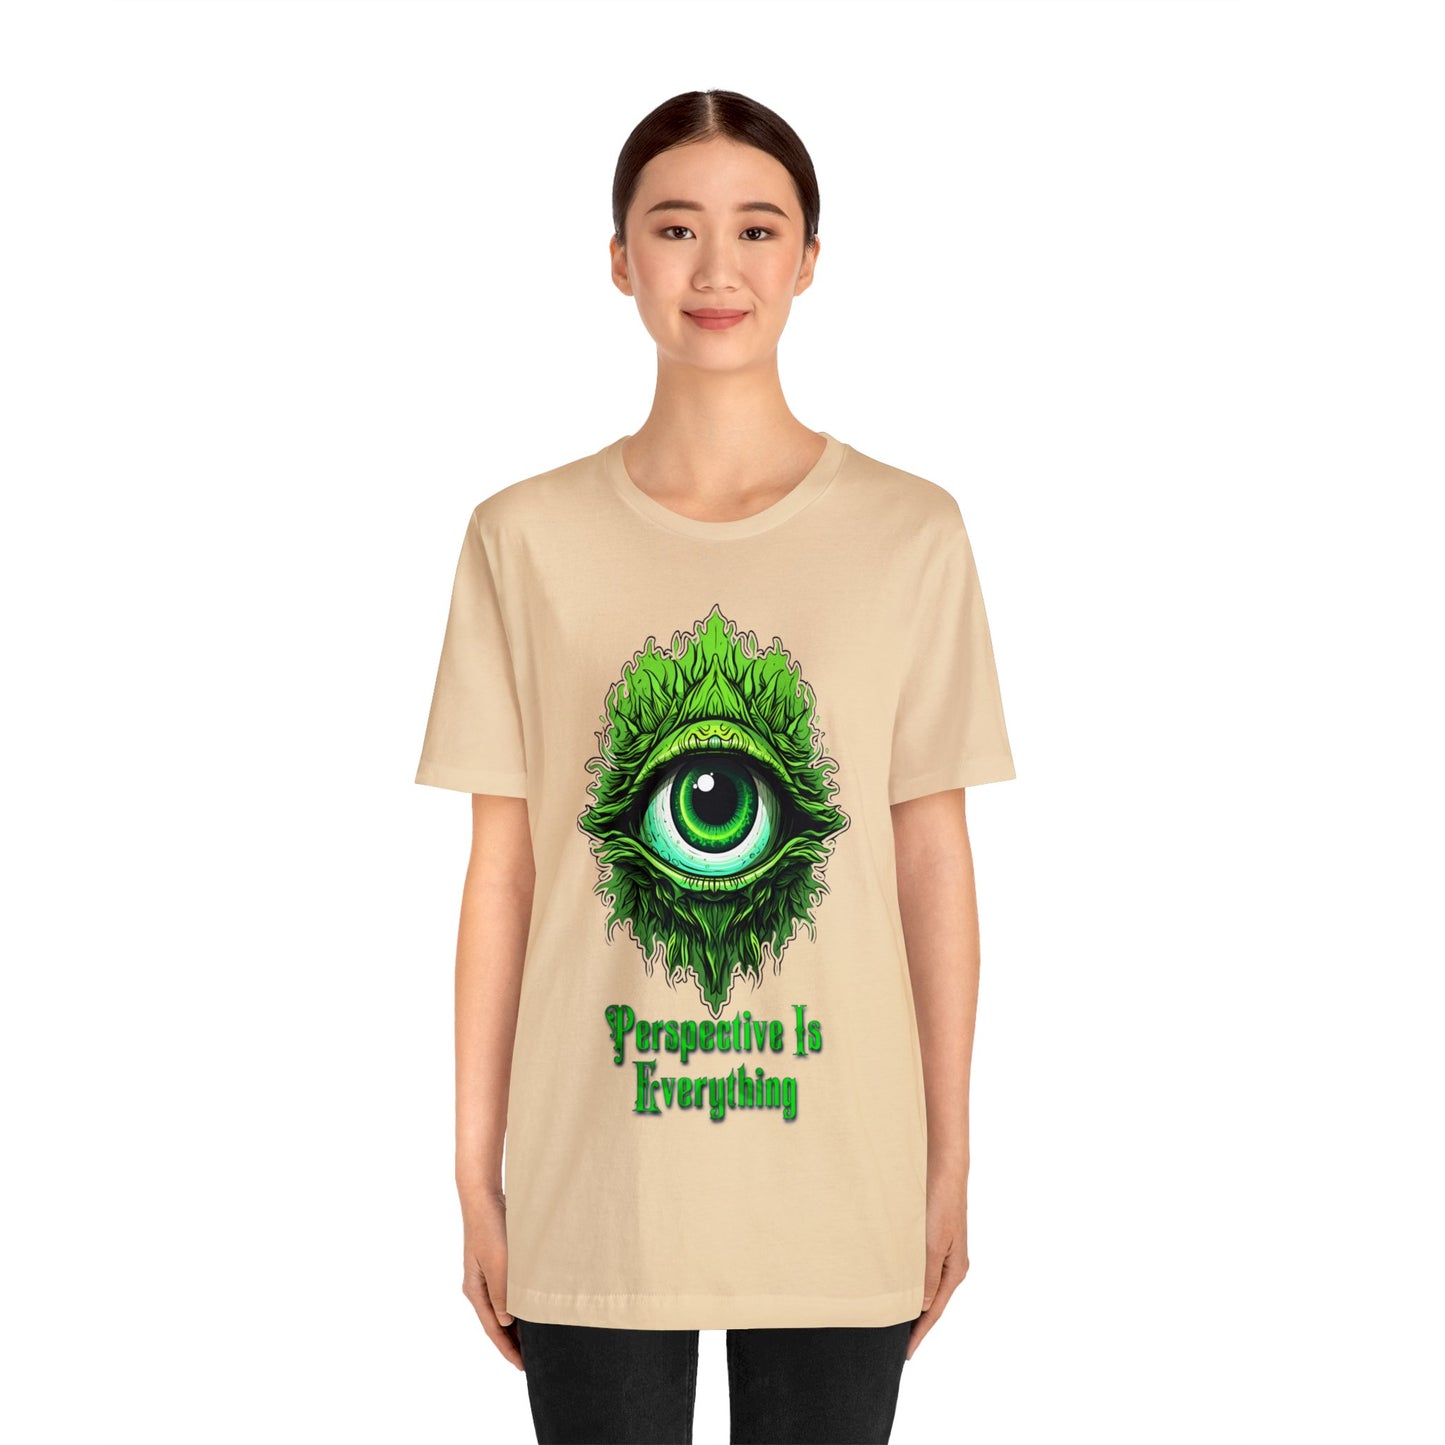 Perspective is Everything: Green | Unisex Jersey Short Sleeve Tee